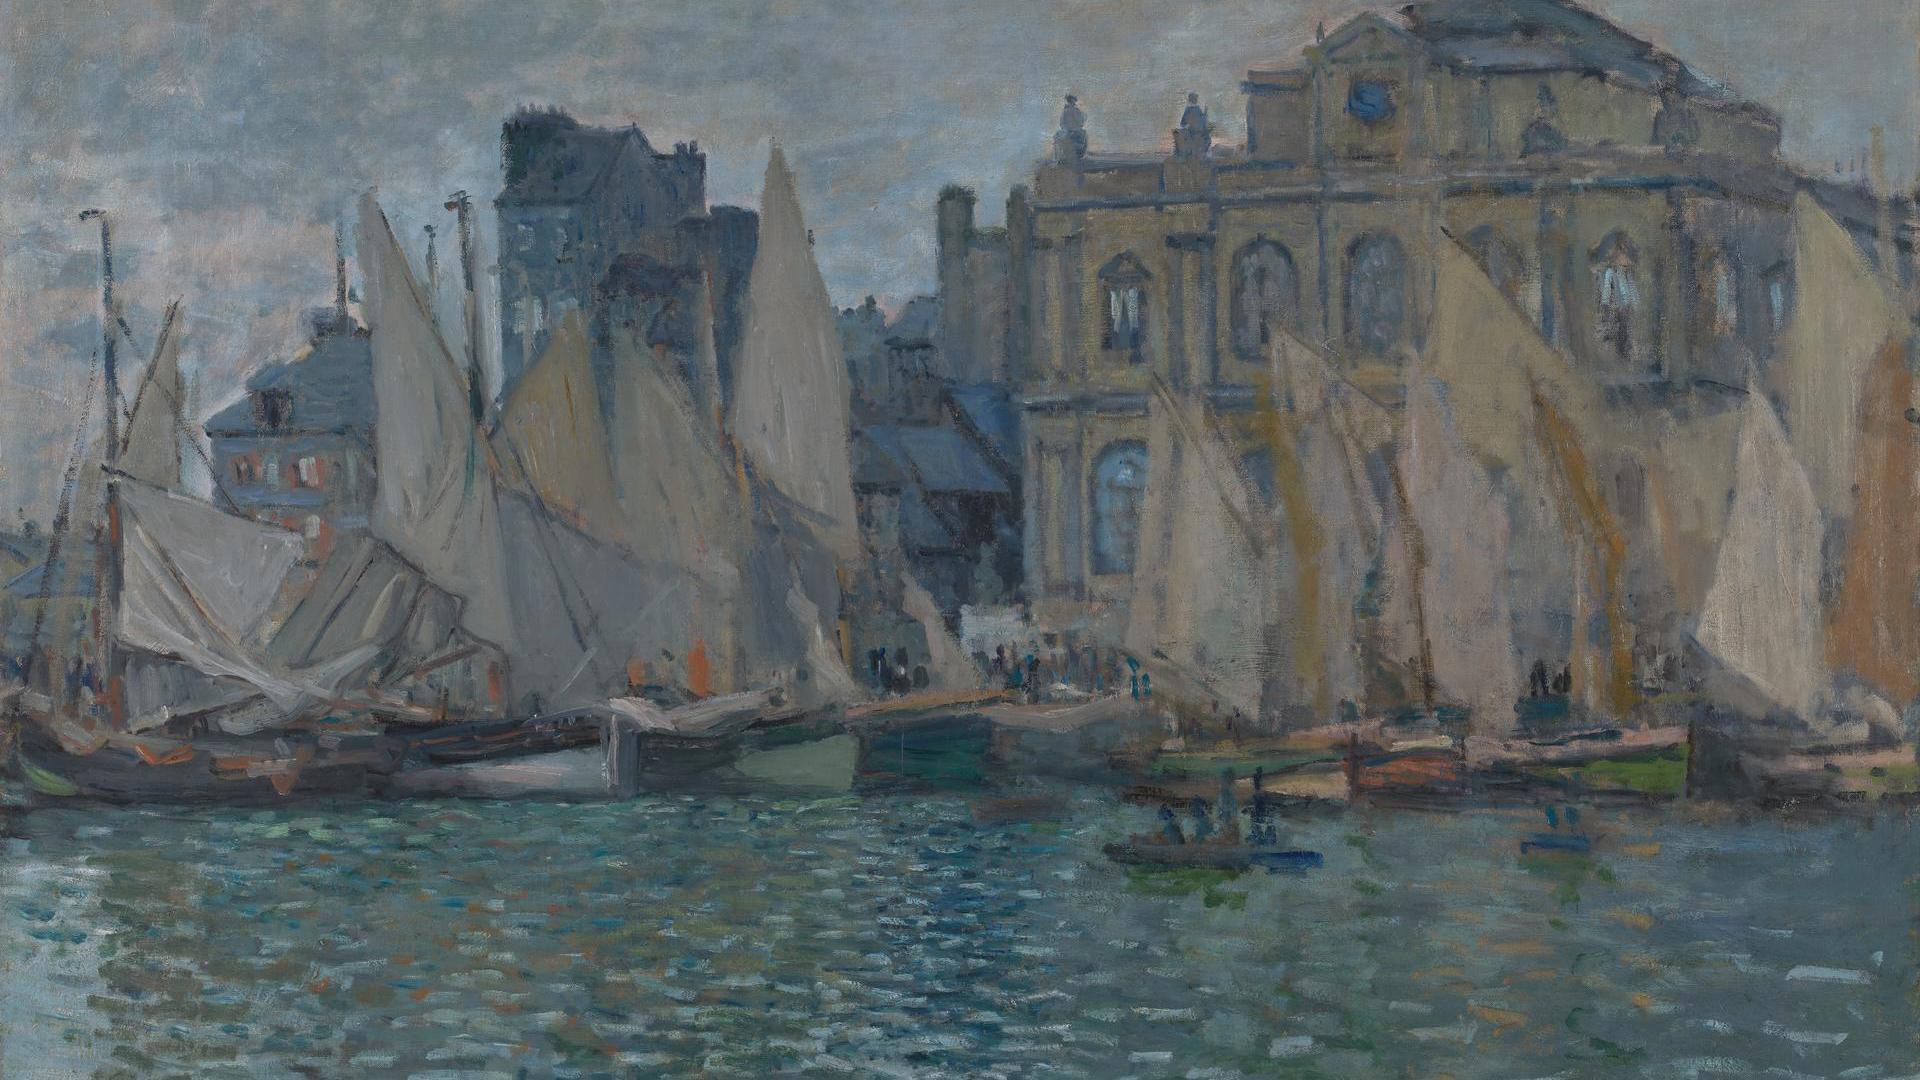 The Museum at Le Havre by Claude Monet